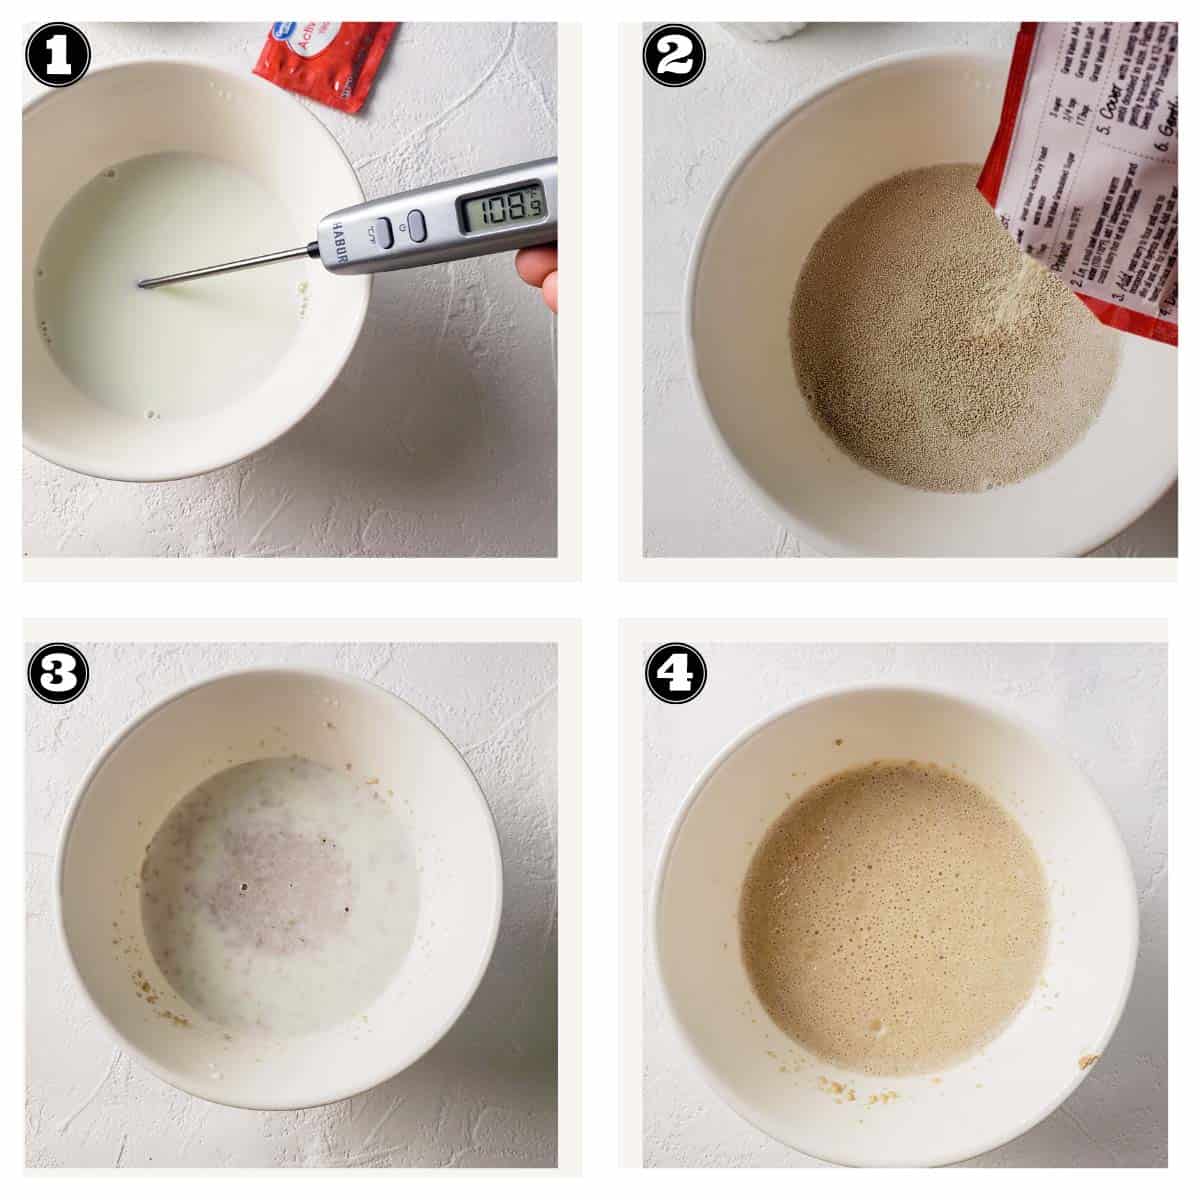 images showing process of blooming the active dryyeast